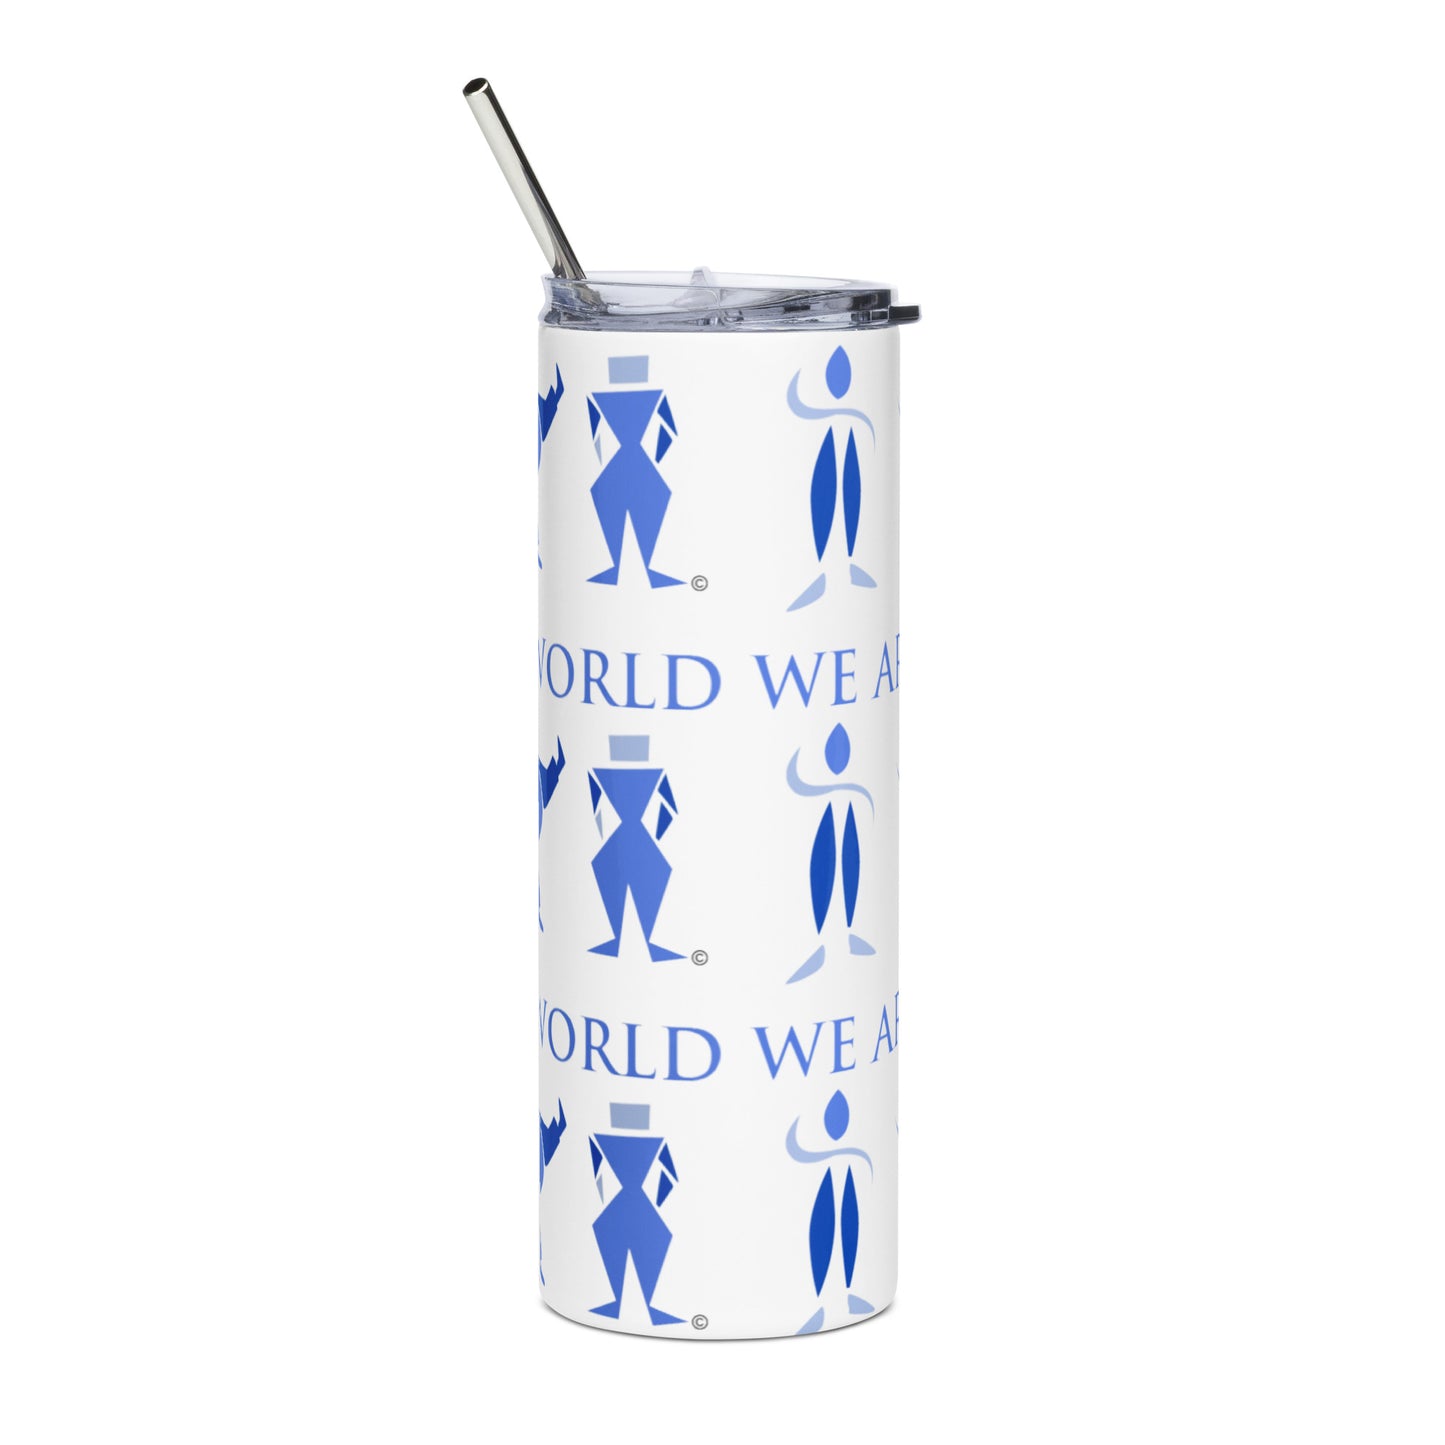 We Are Not of This World Stainless Steel Tumbler